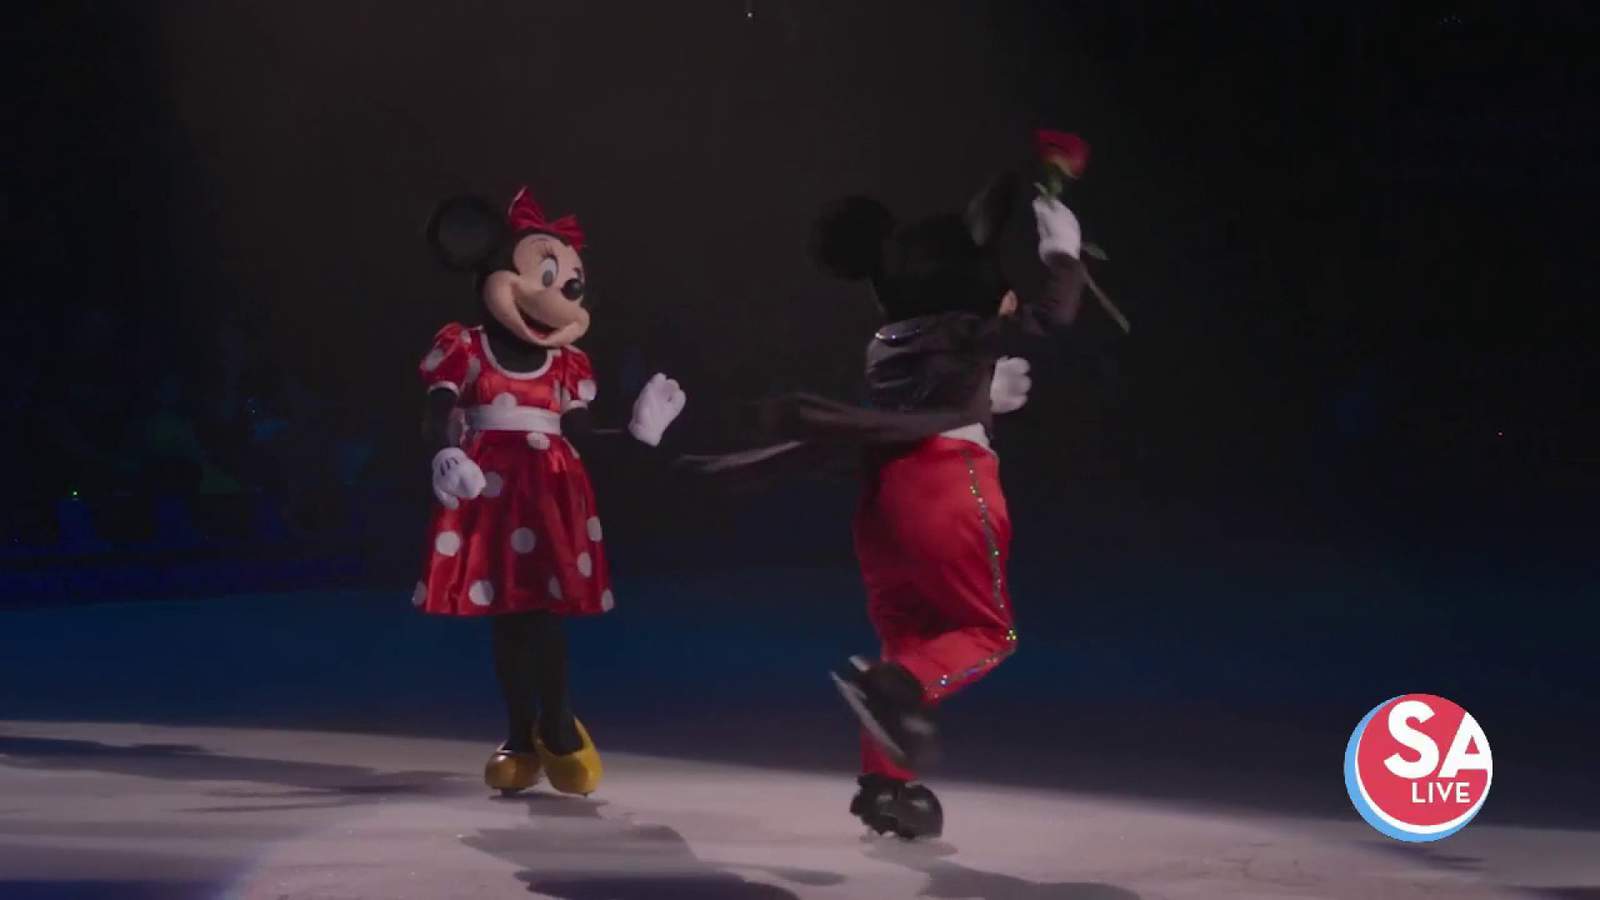 Disney on Ice is coming to the Alamodome today